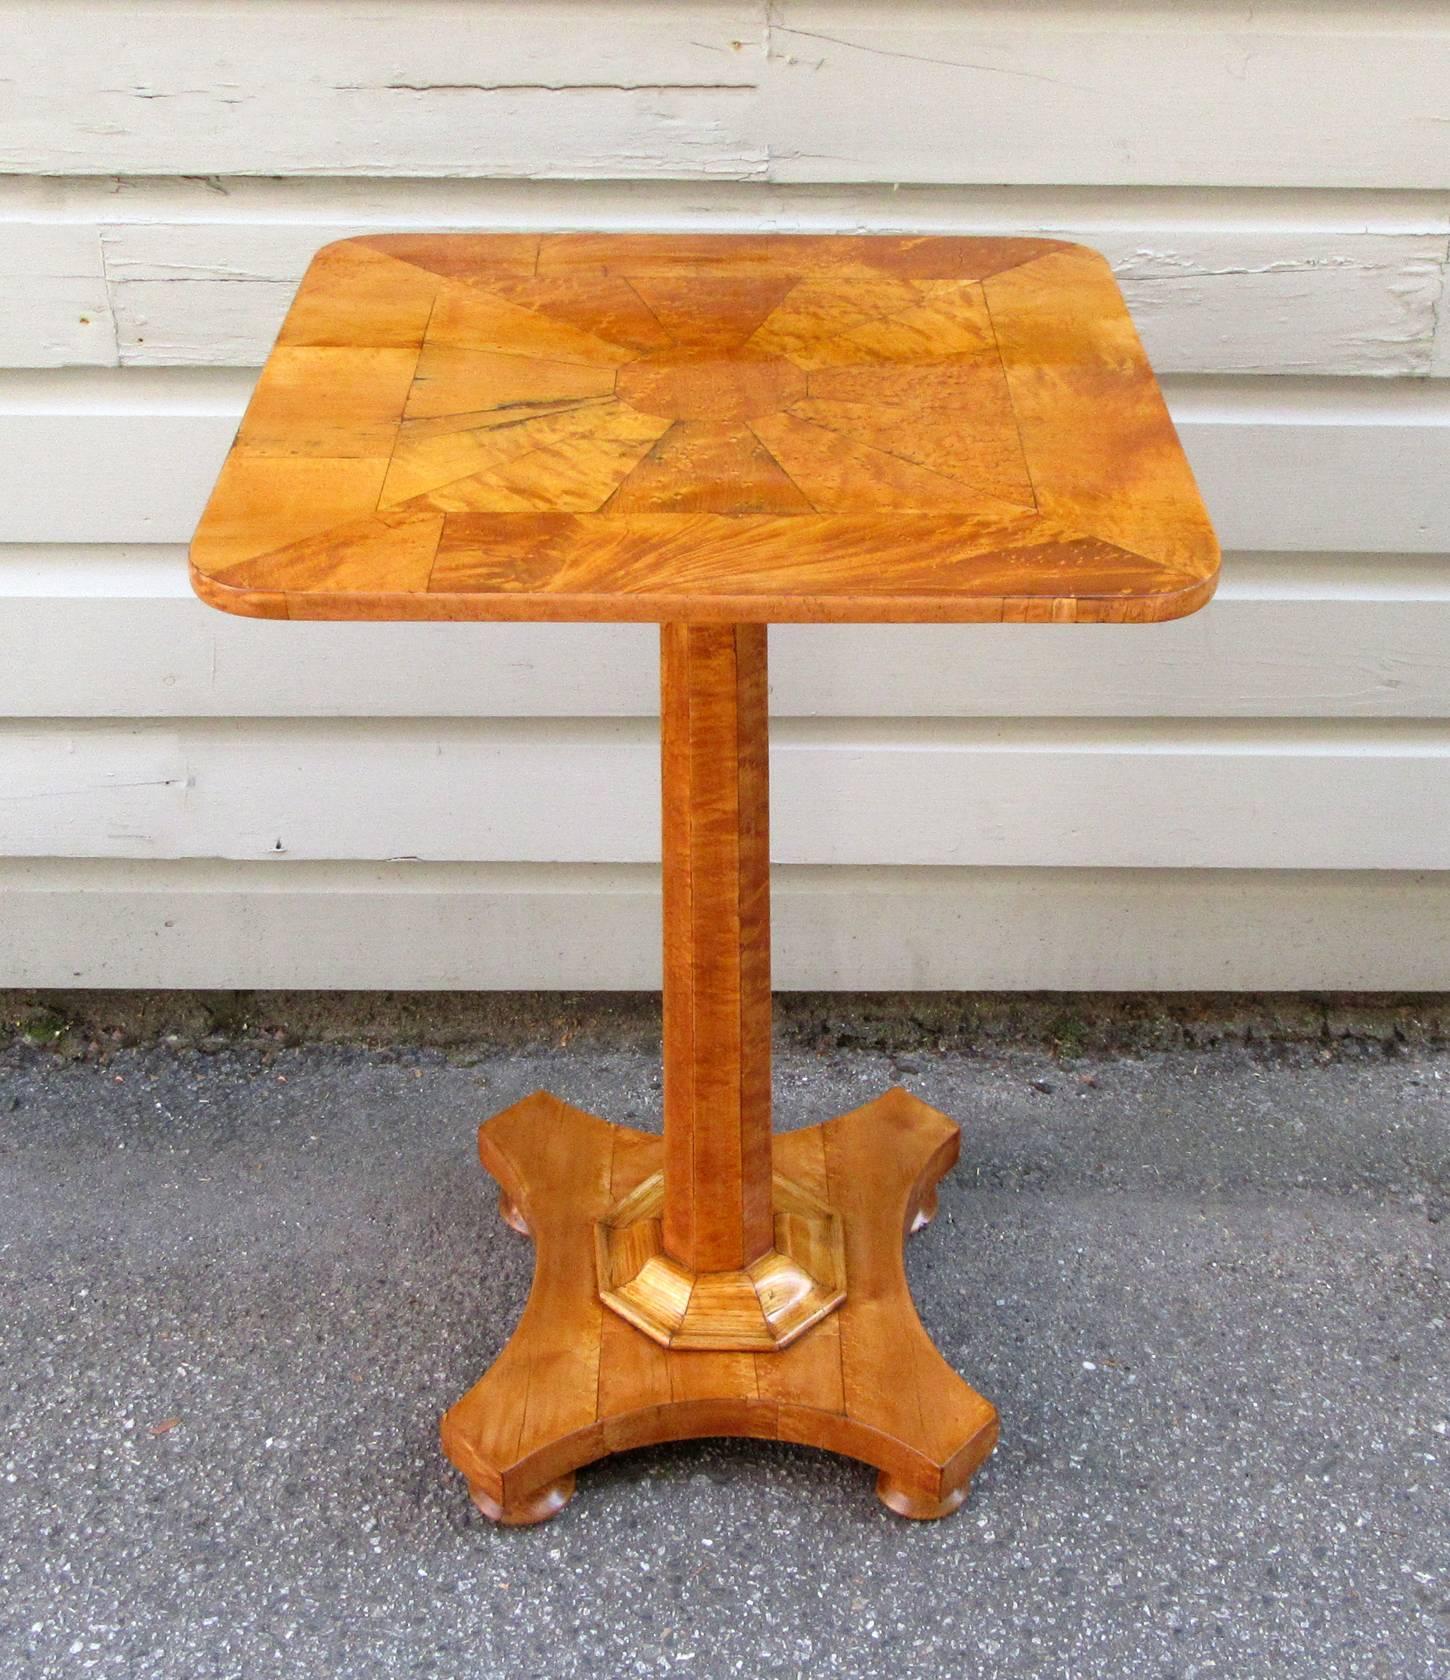 A very fine 19th century English Regency pedestal table, circa 1820, featuring a lustrous bird's-eye maple top and column pedestal base with trumpet collar and feet made from ash.